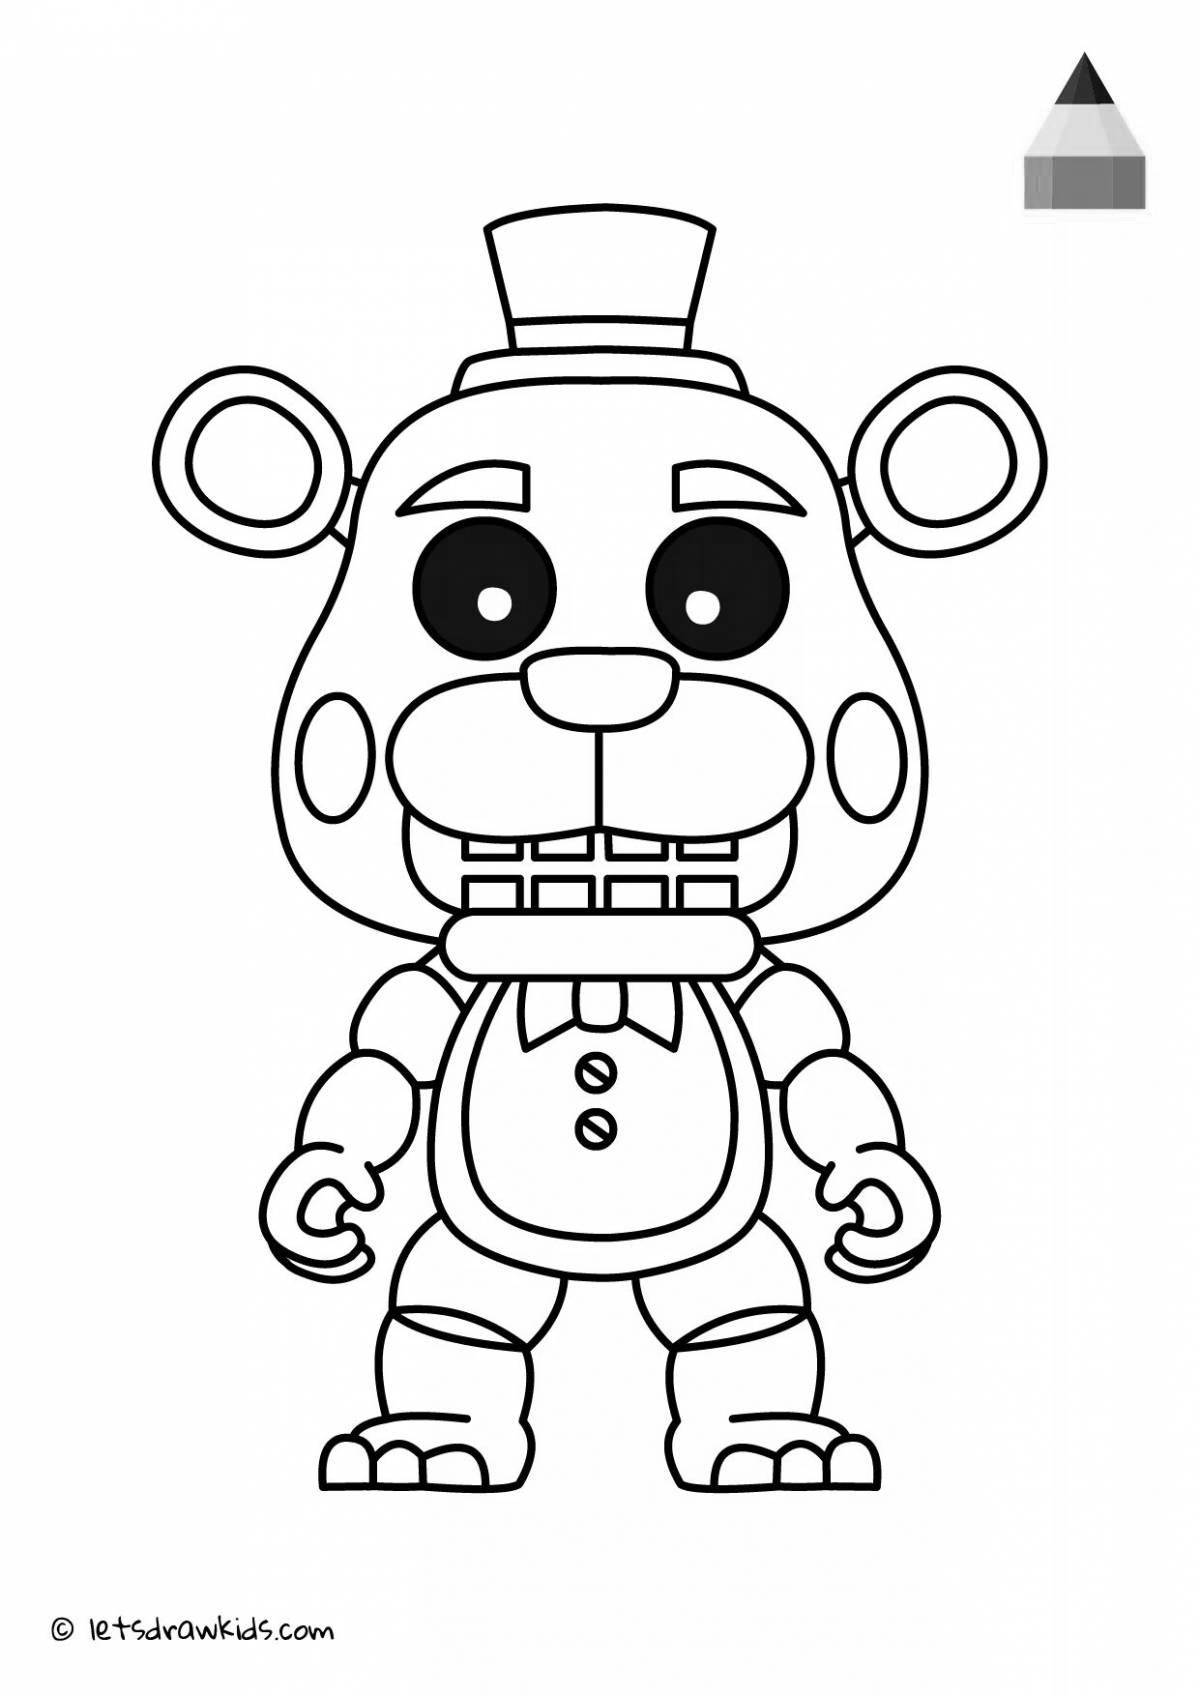 Fuzzy bear freddy coloring page